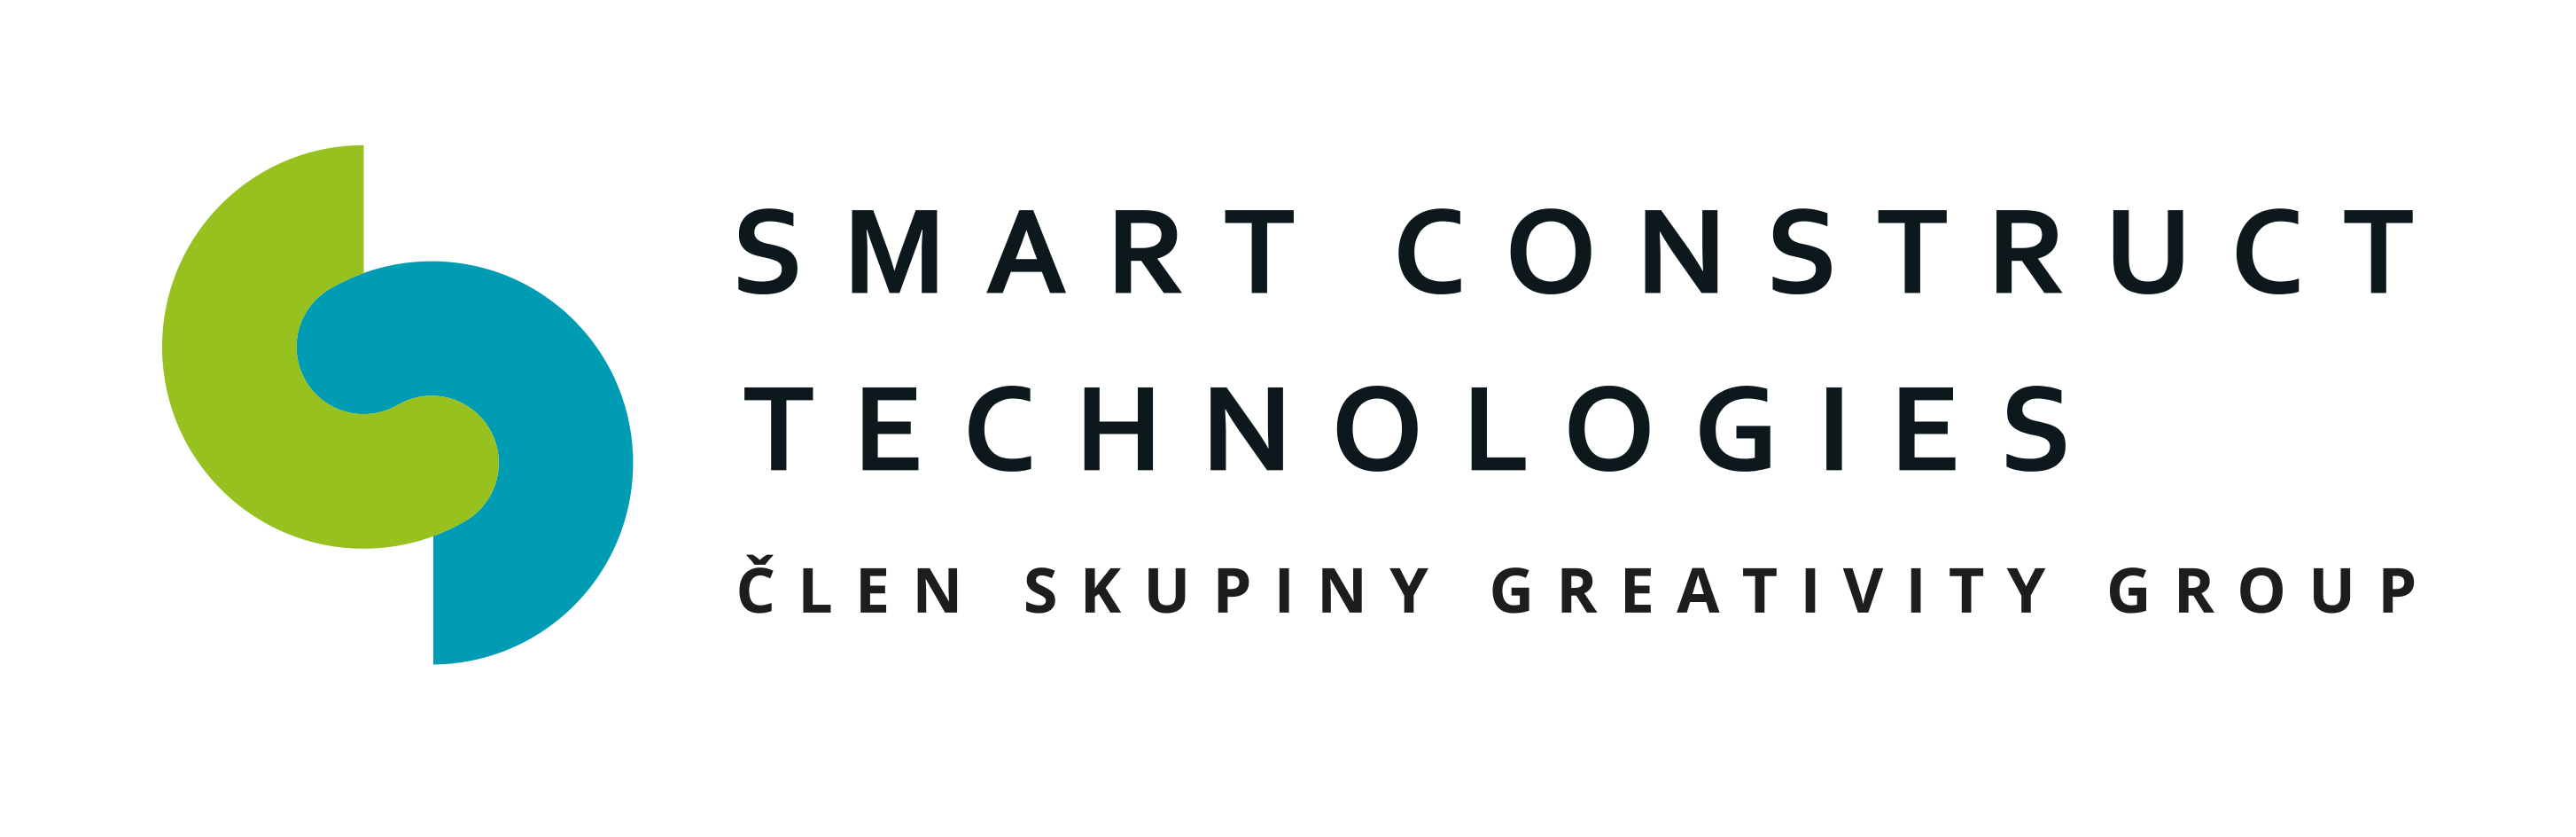 Greativity Group - investment projects - Smart Construct Technologies